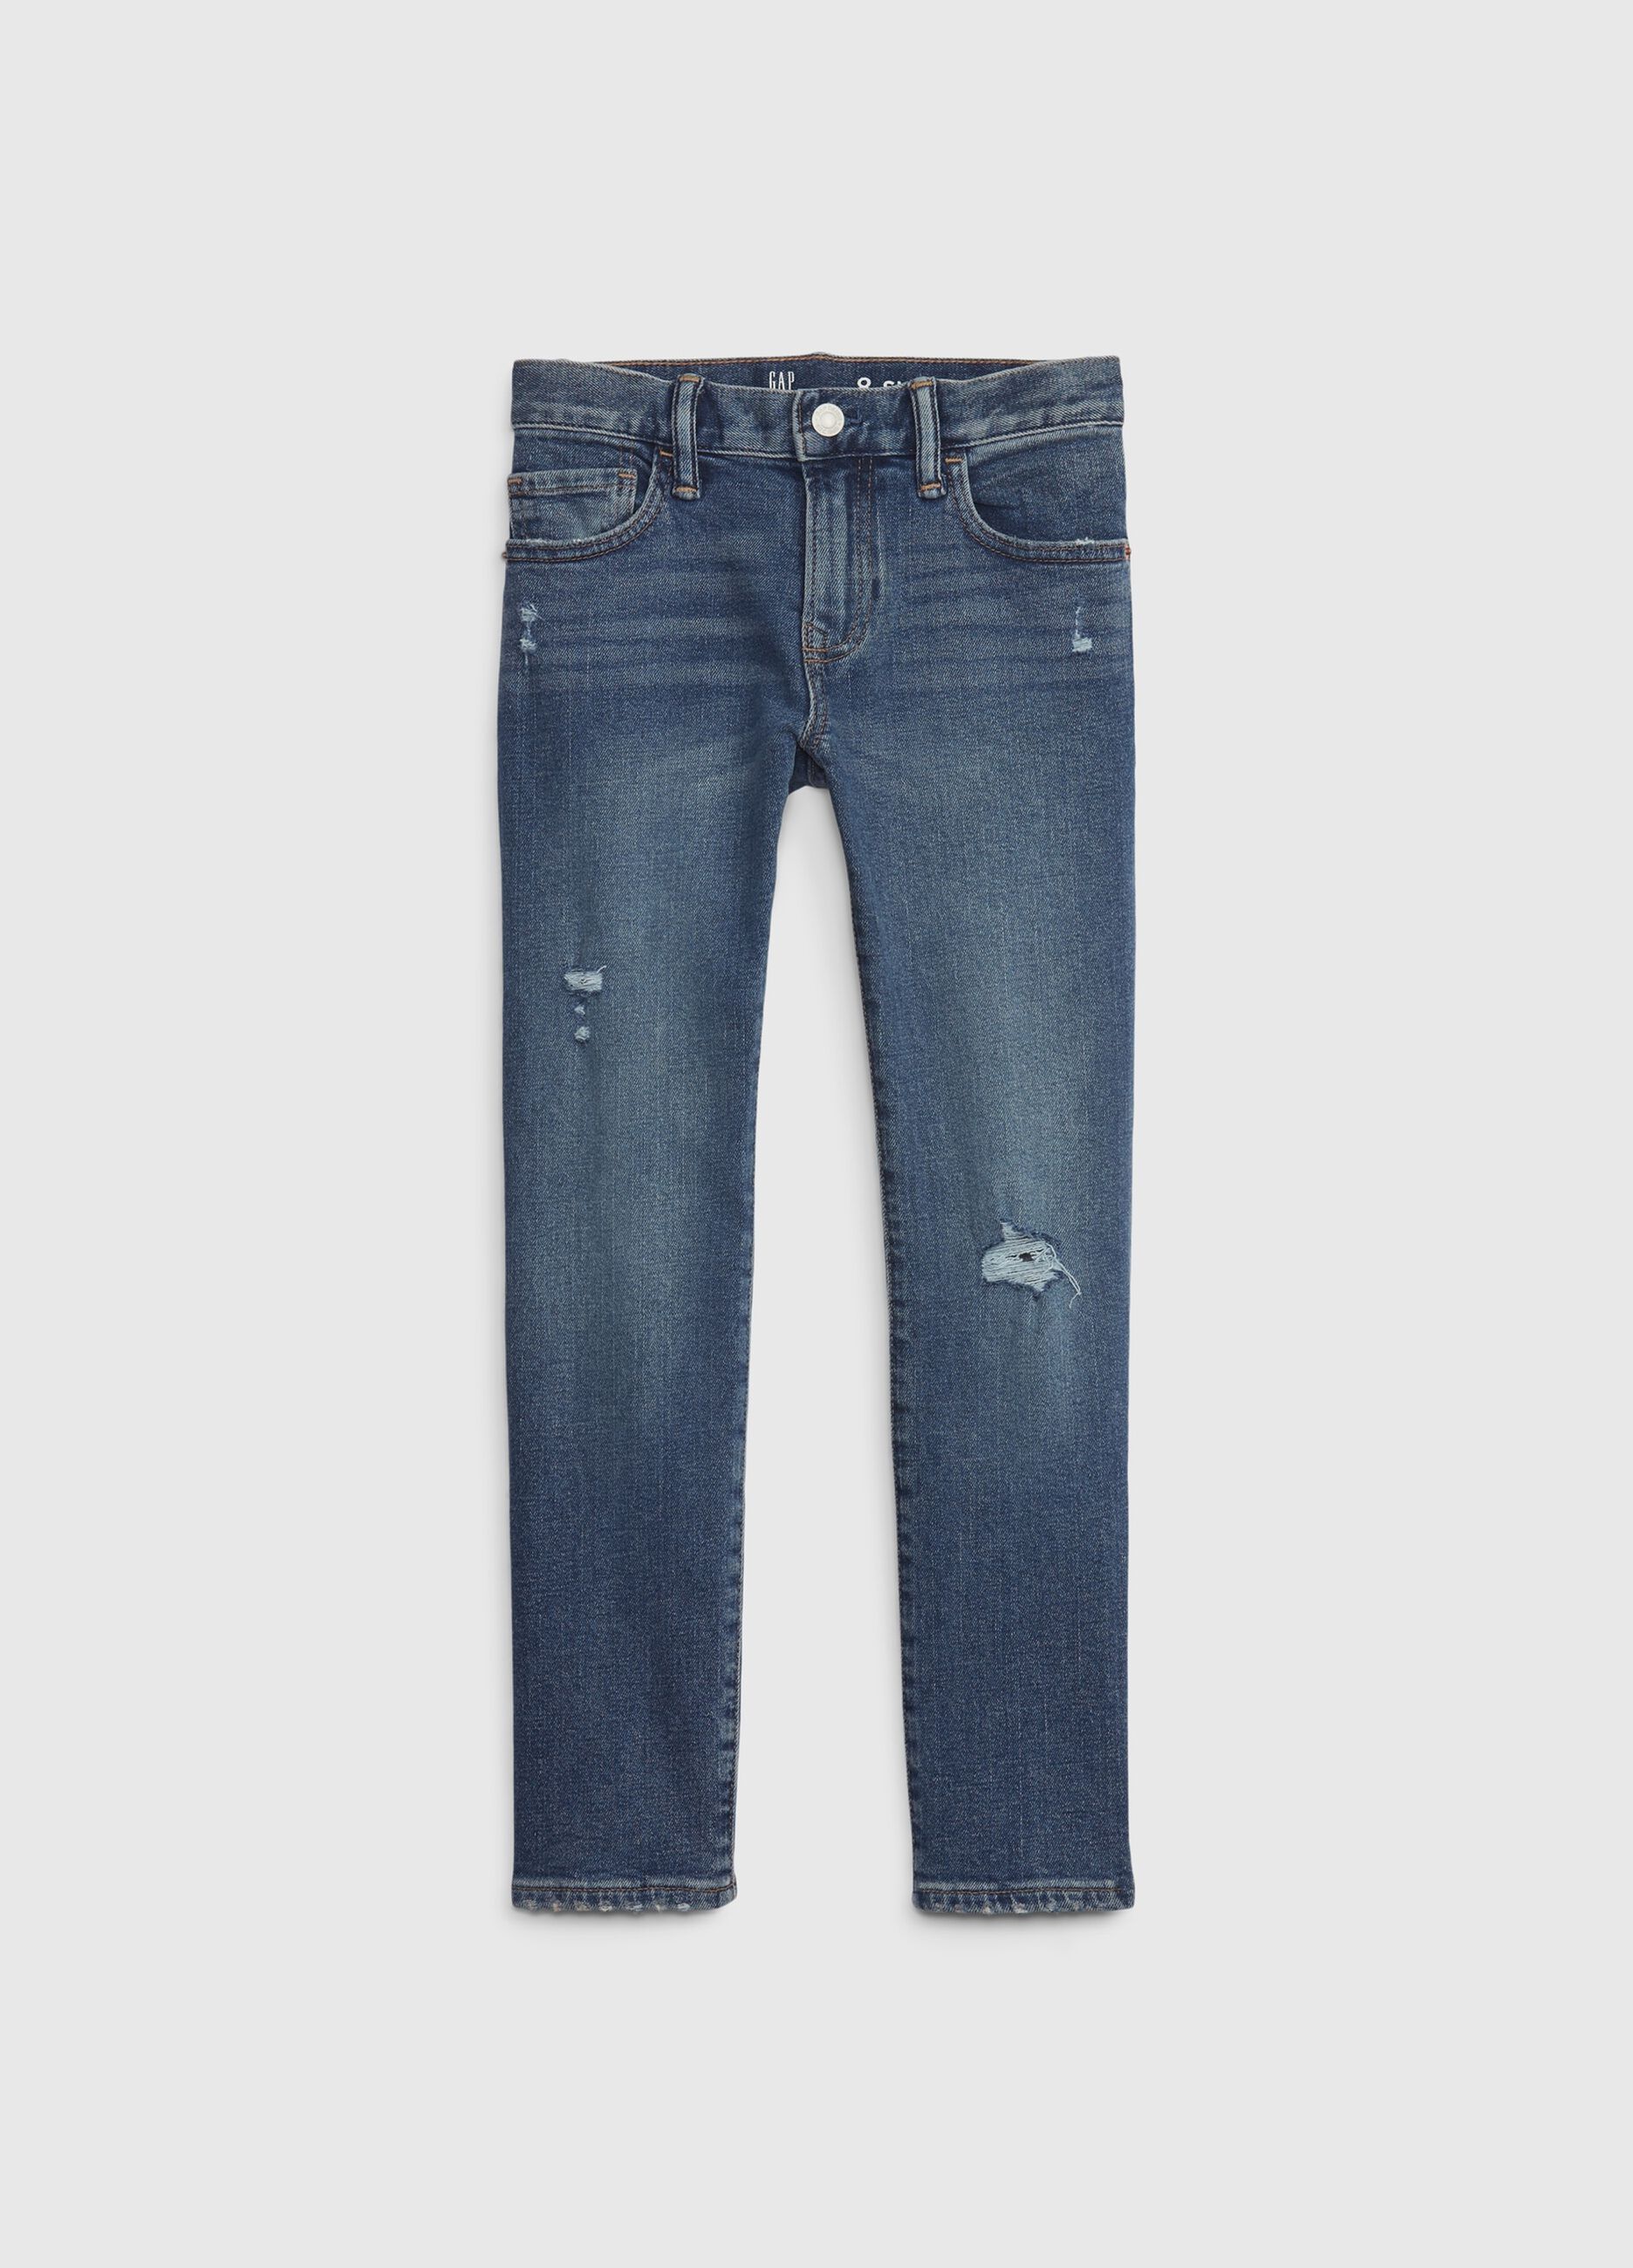 Slim-fit jeans with rips and fading